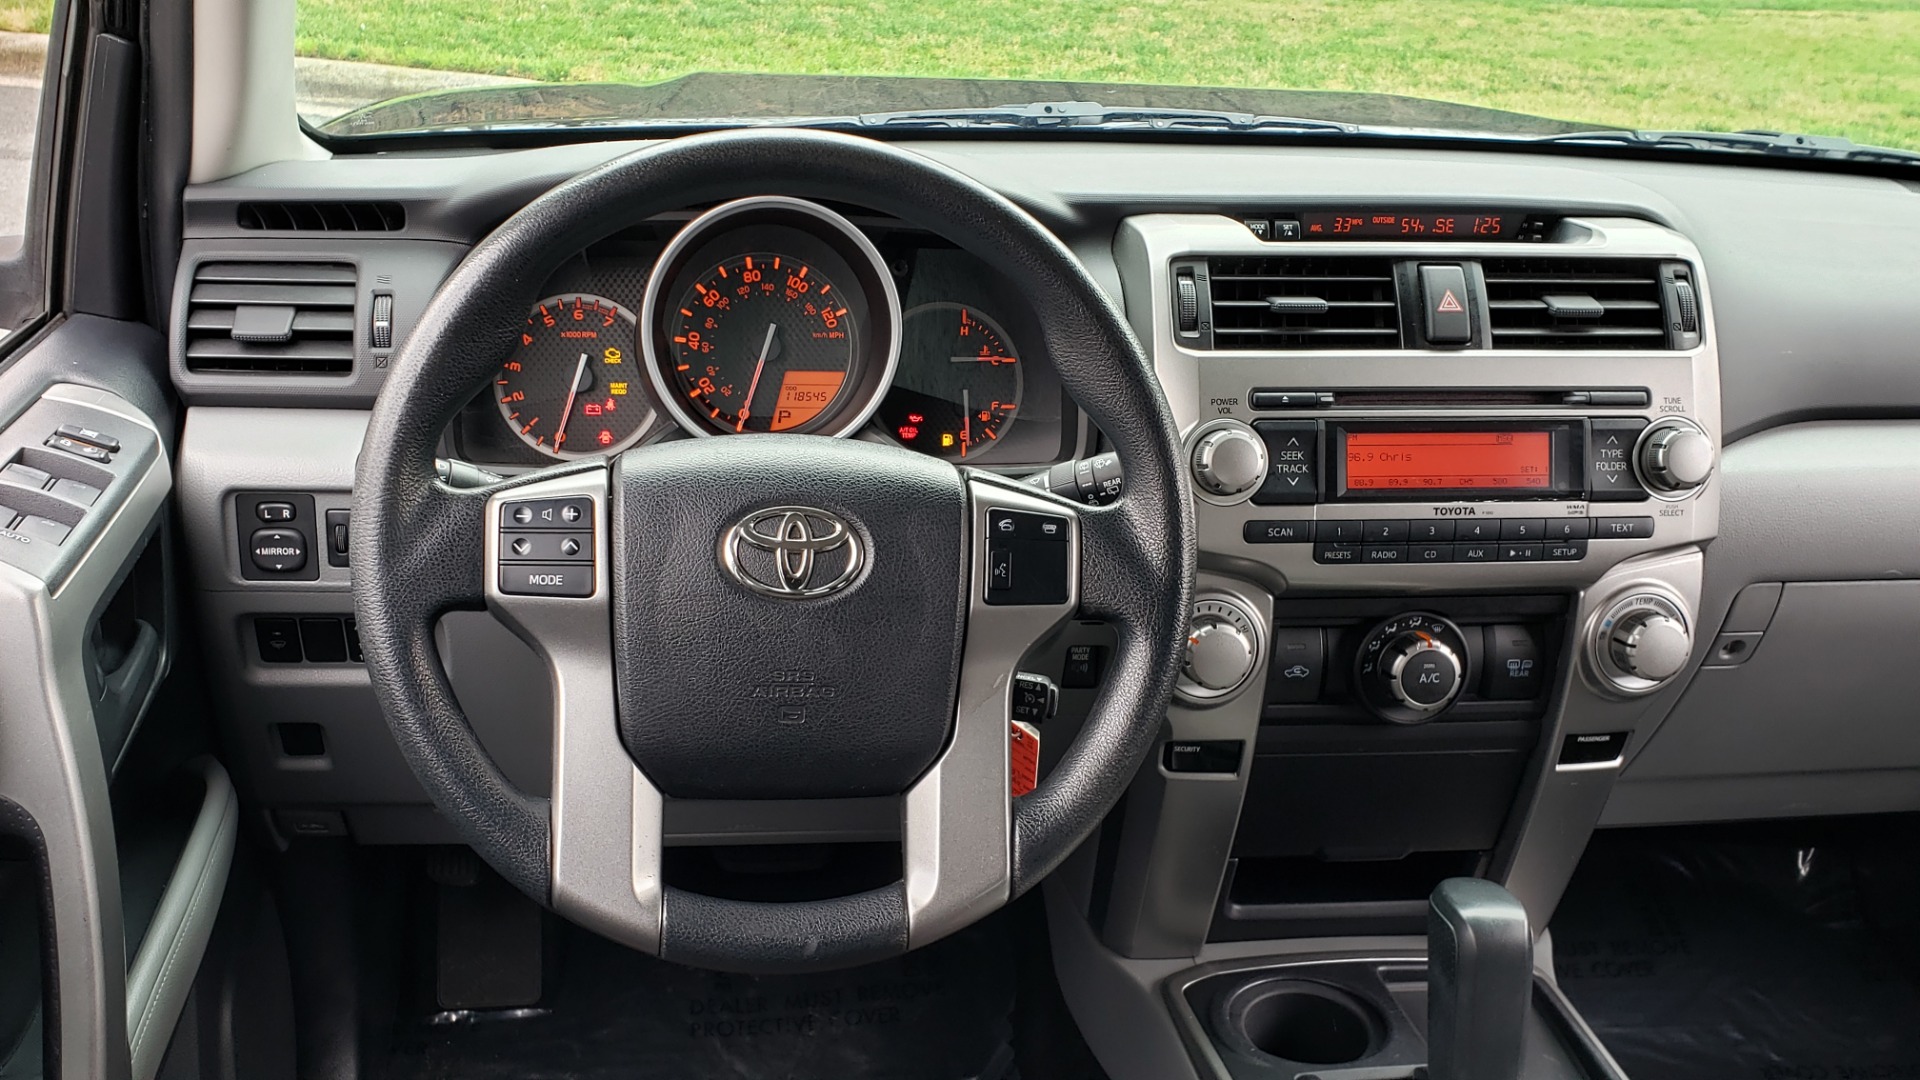 Used 2011 Toyota 4RUNNER SR5 2WD / 5-SPD AUTO / 4.0L V6 / SAT RADIO / PWR STS for sale Sold at Formula Imports in Charlotte NC 28227 37